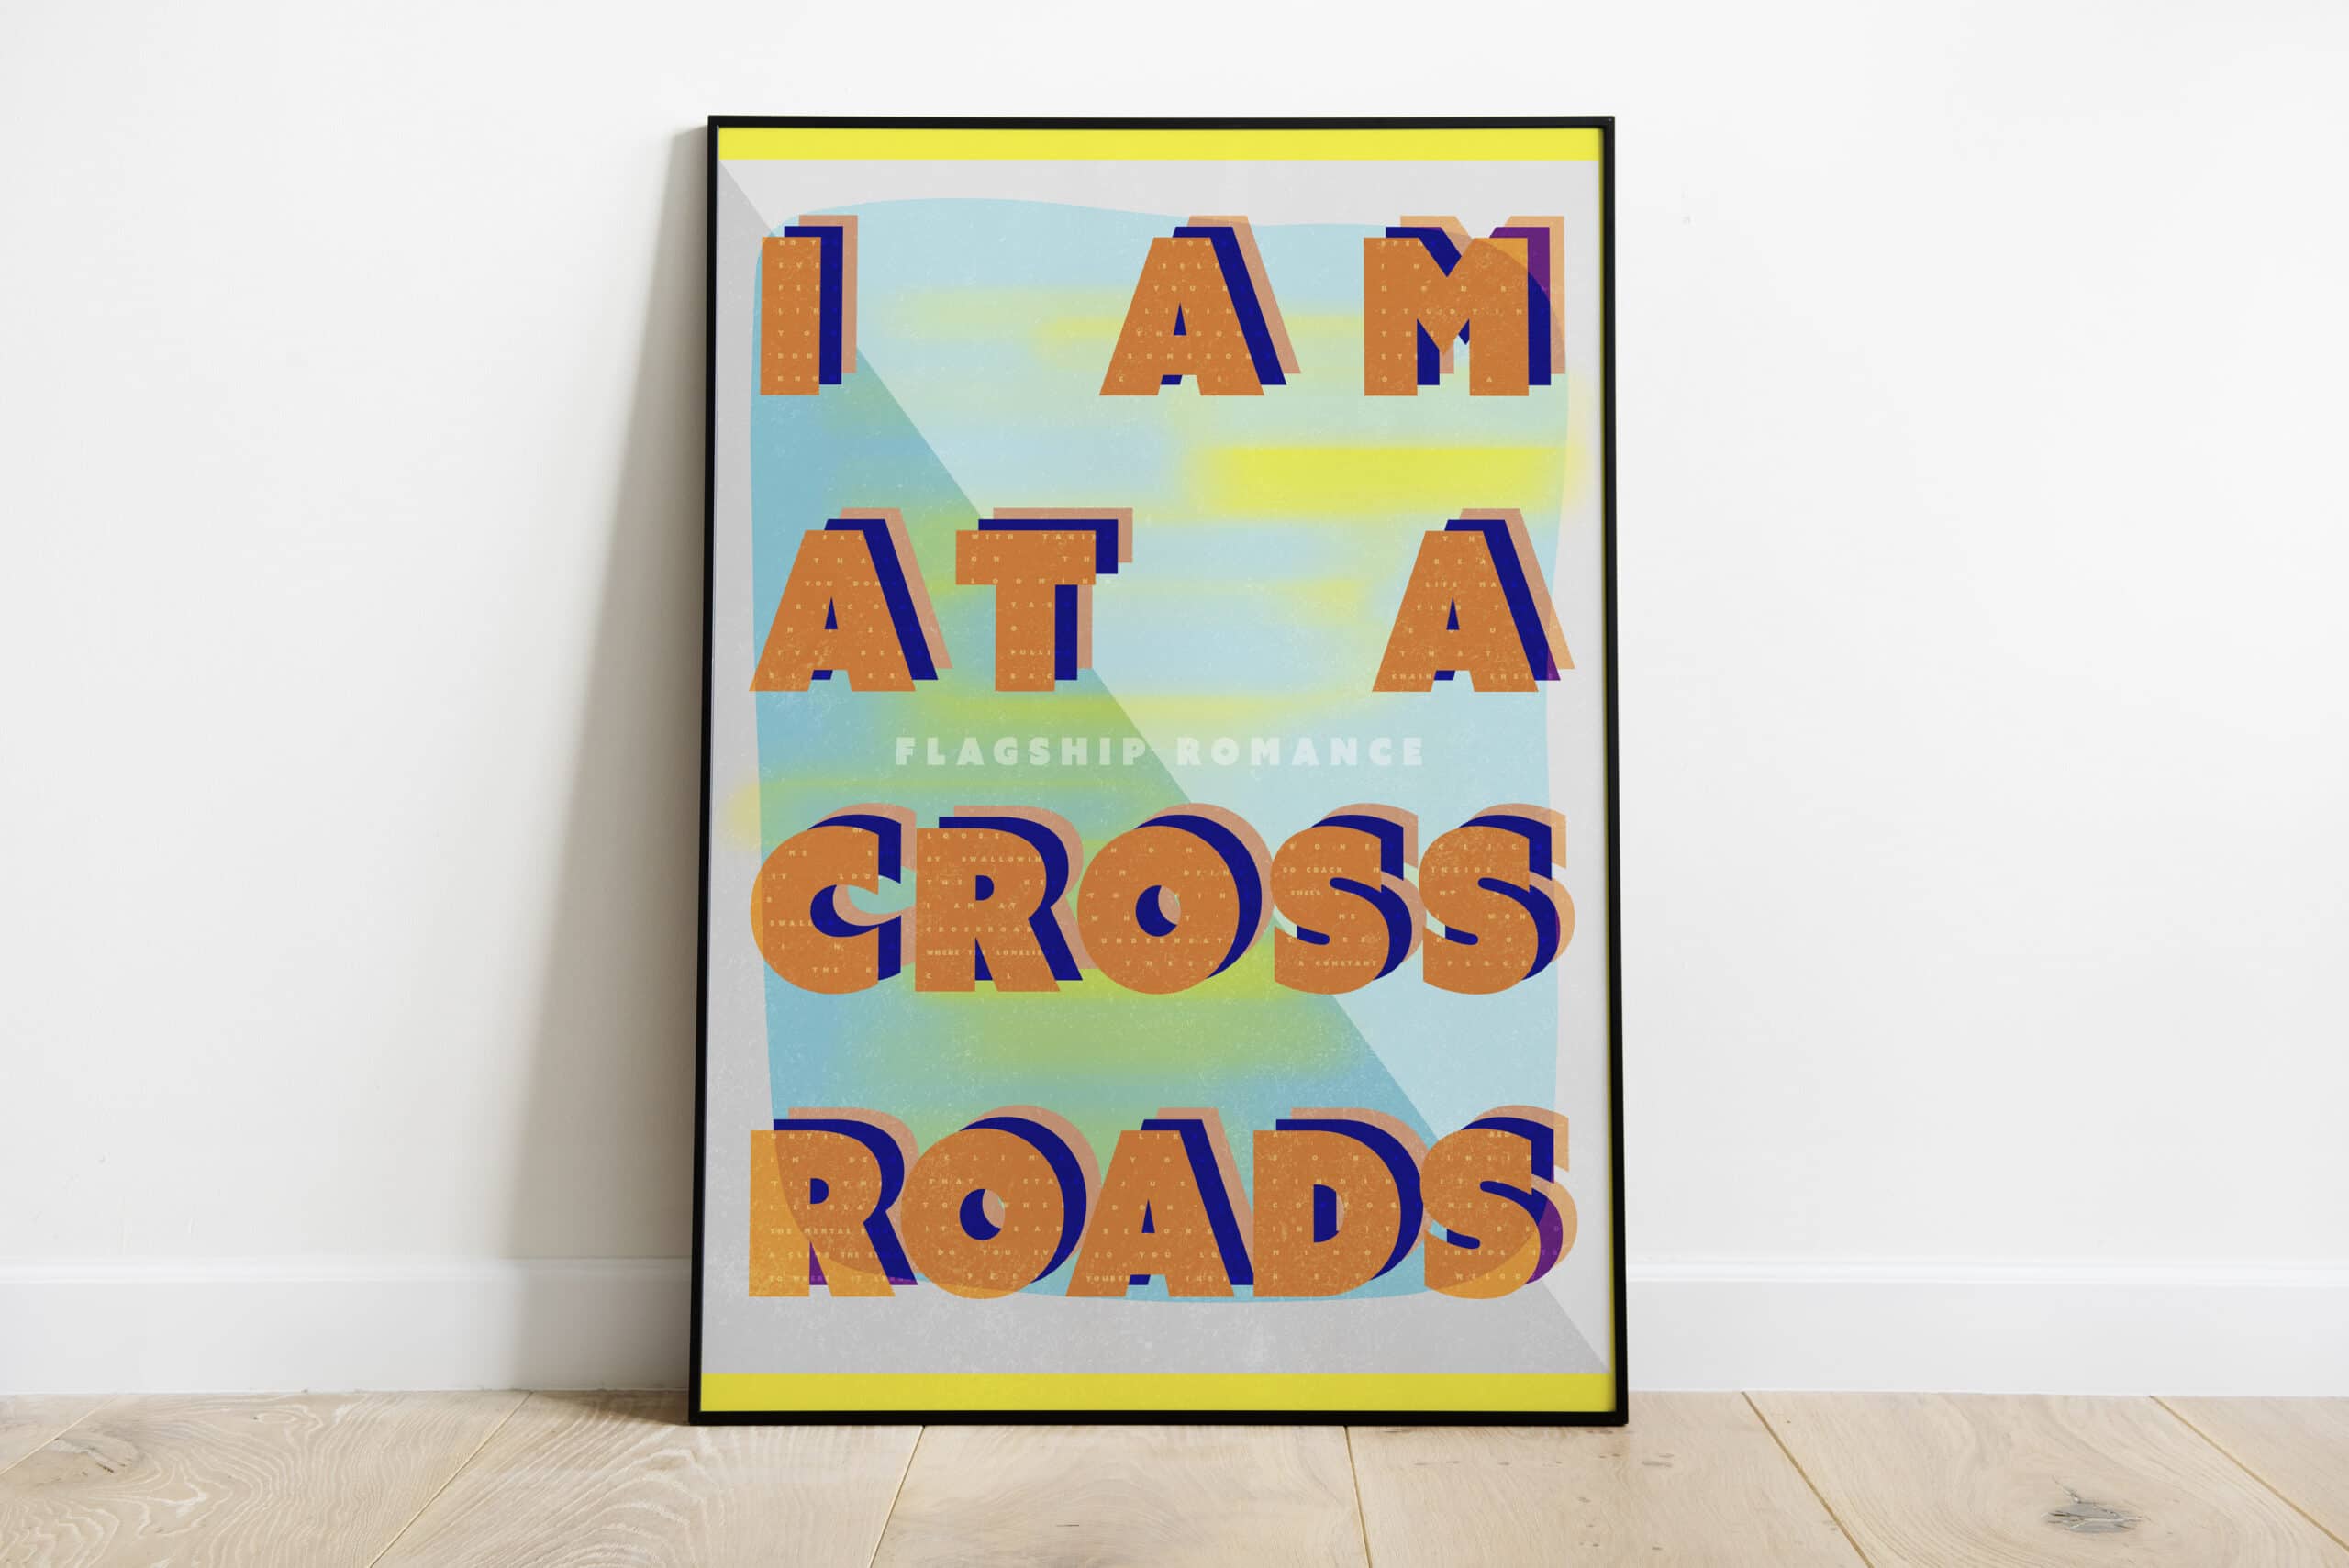 Mock-up of poster featuring "Crossroads" song lyrics by folk duo Flaghip Romance designed by Jordyn Jackson